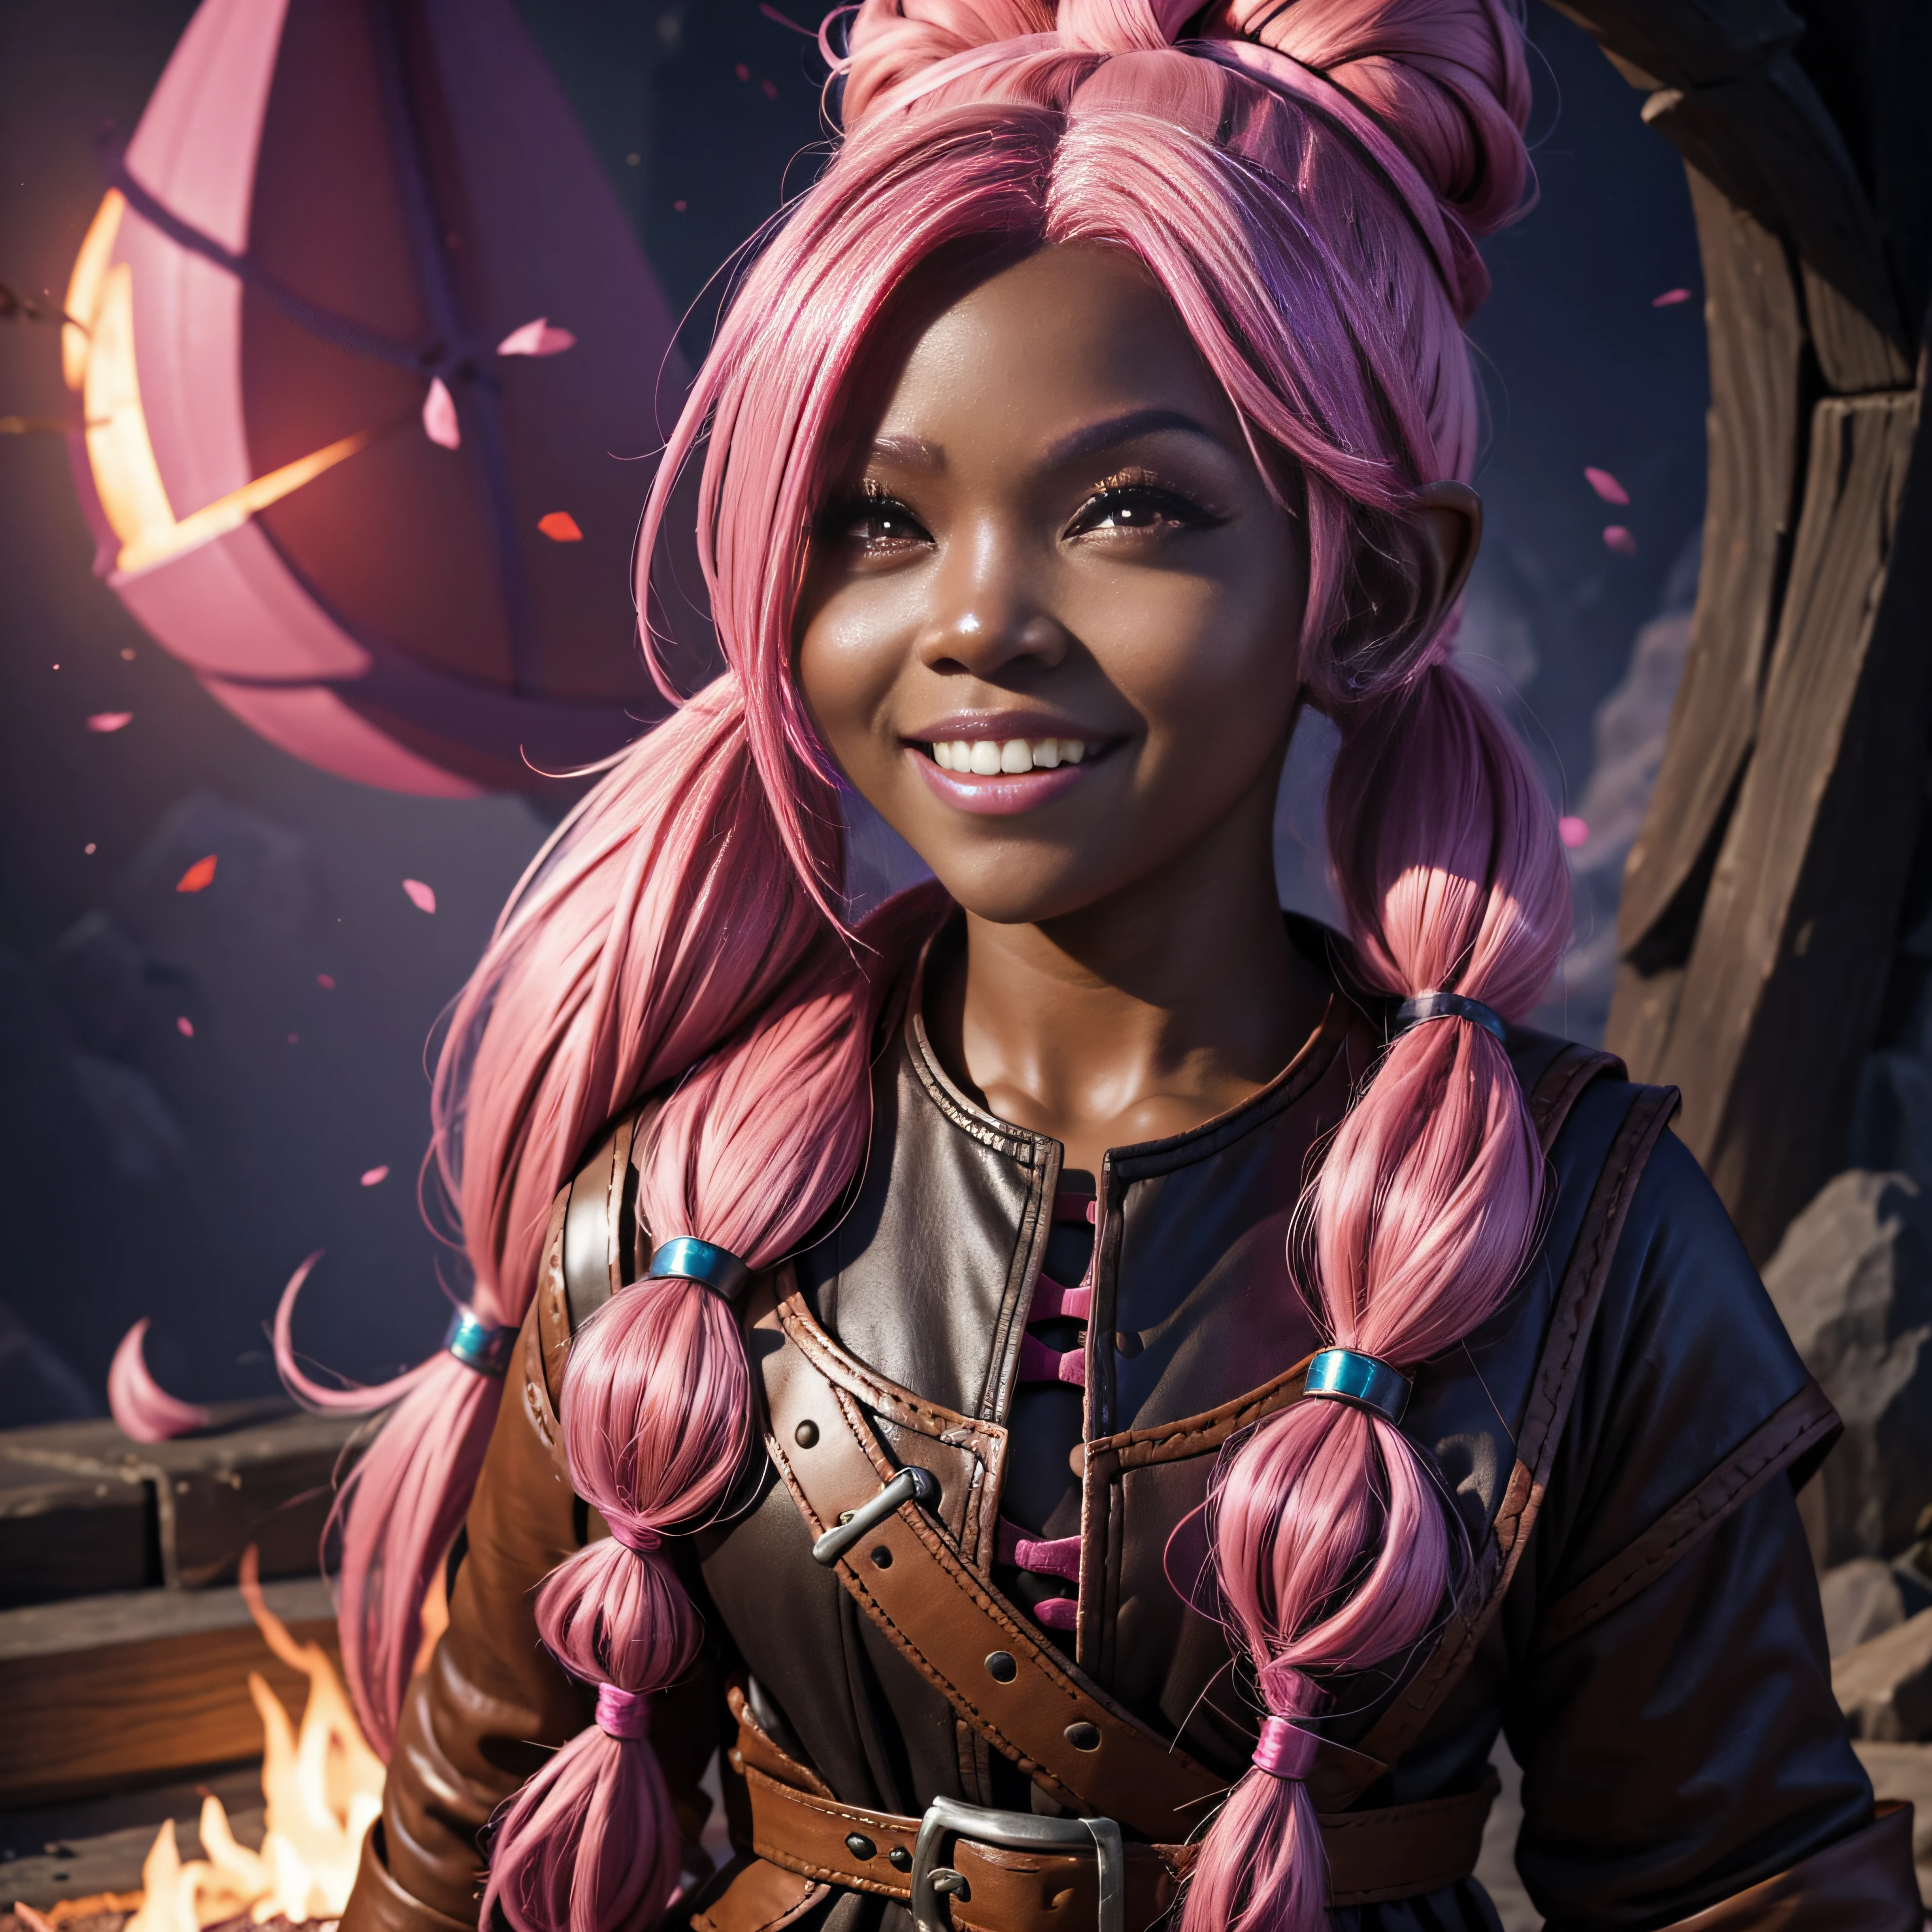 Dnd portrait of gnome, adult female gnome, dark skin, candy pink hair, hot pink hair, bright pink hair, topknot twintails, goggles, enthusiastic expression